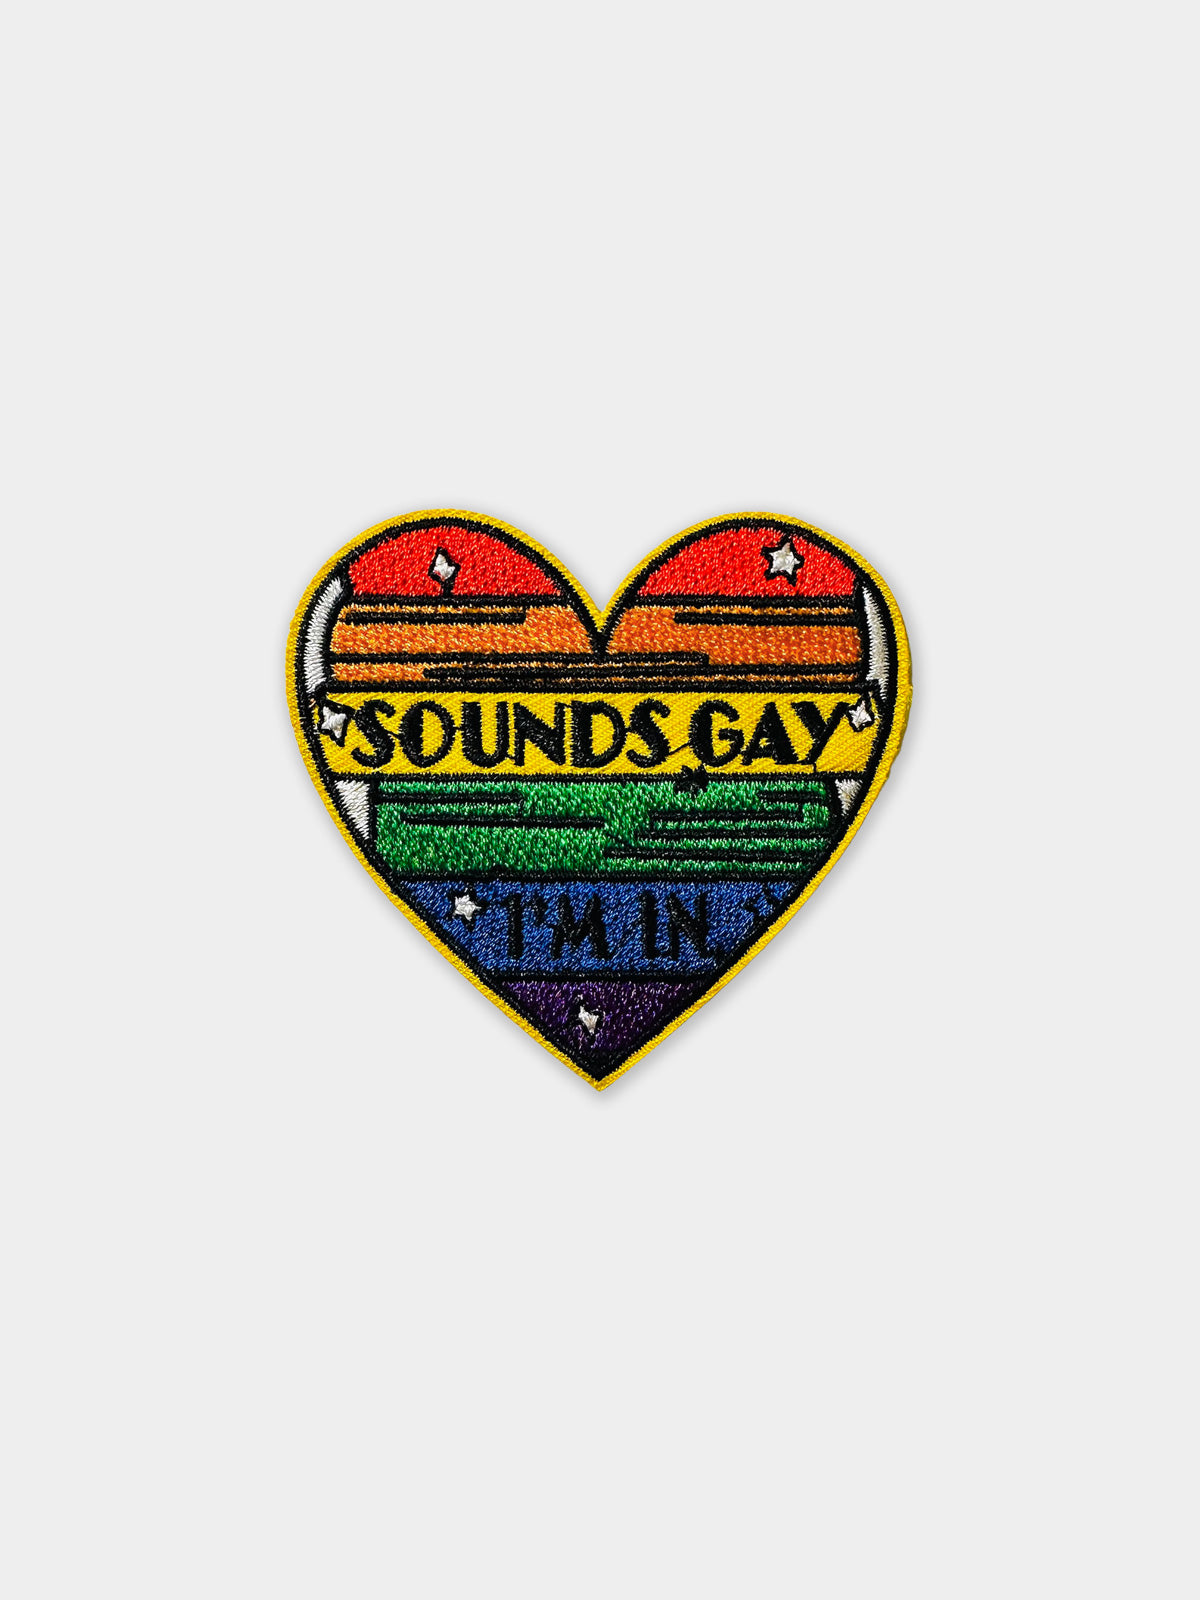 Sounds Gay Patch